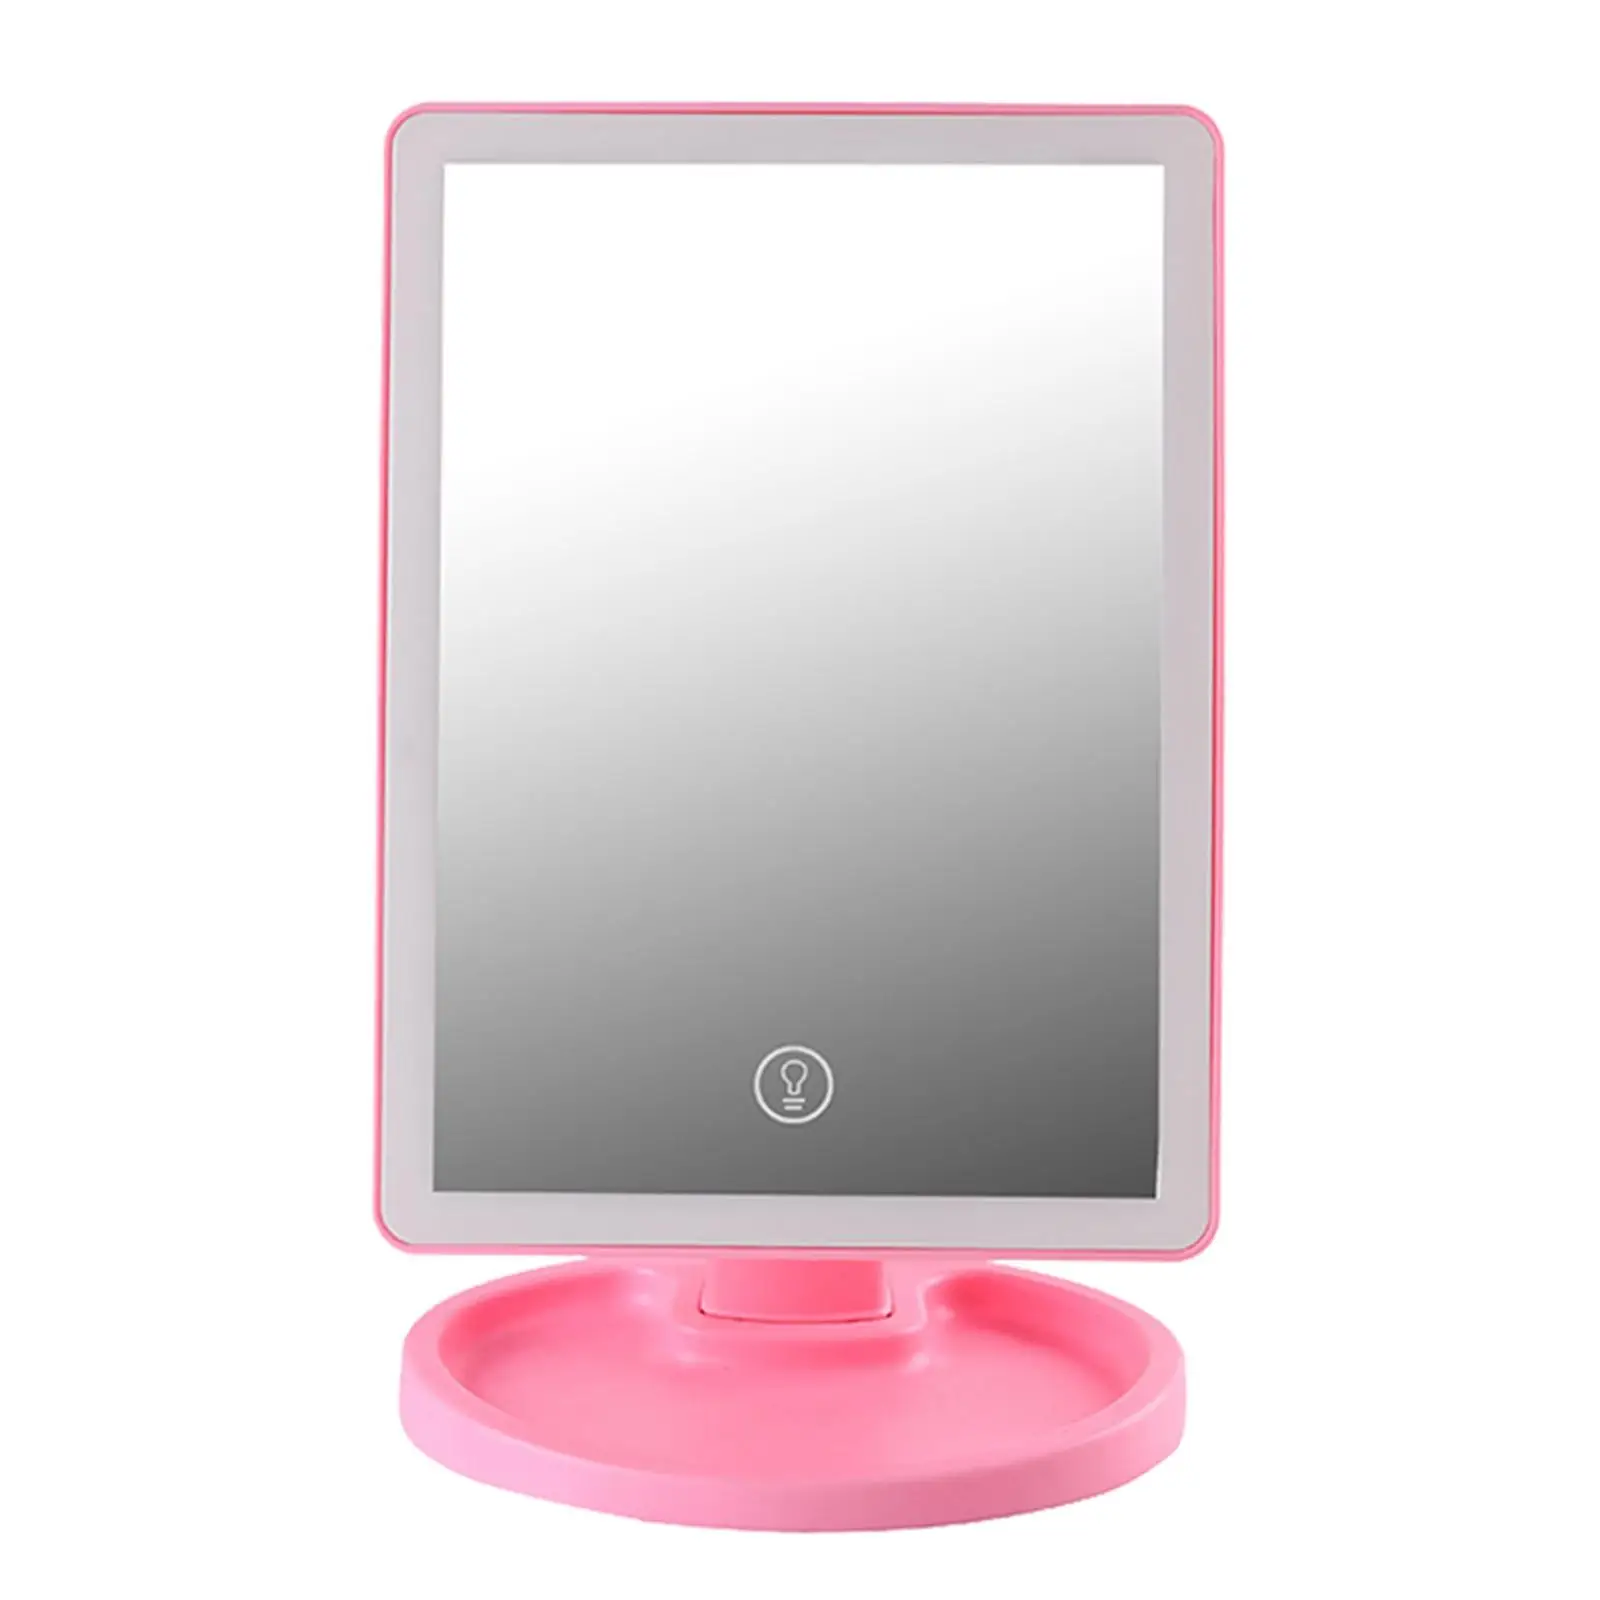 Makeup Mirror with Lights Dimmable Lights Desk Vanity Mirror Illuminated Mirror USB Rechargeable for Make Up Women Gift